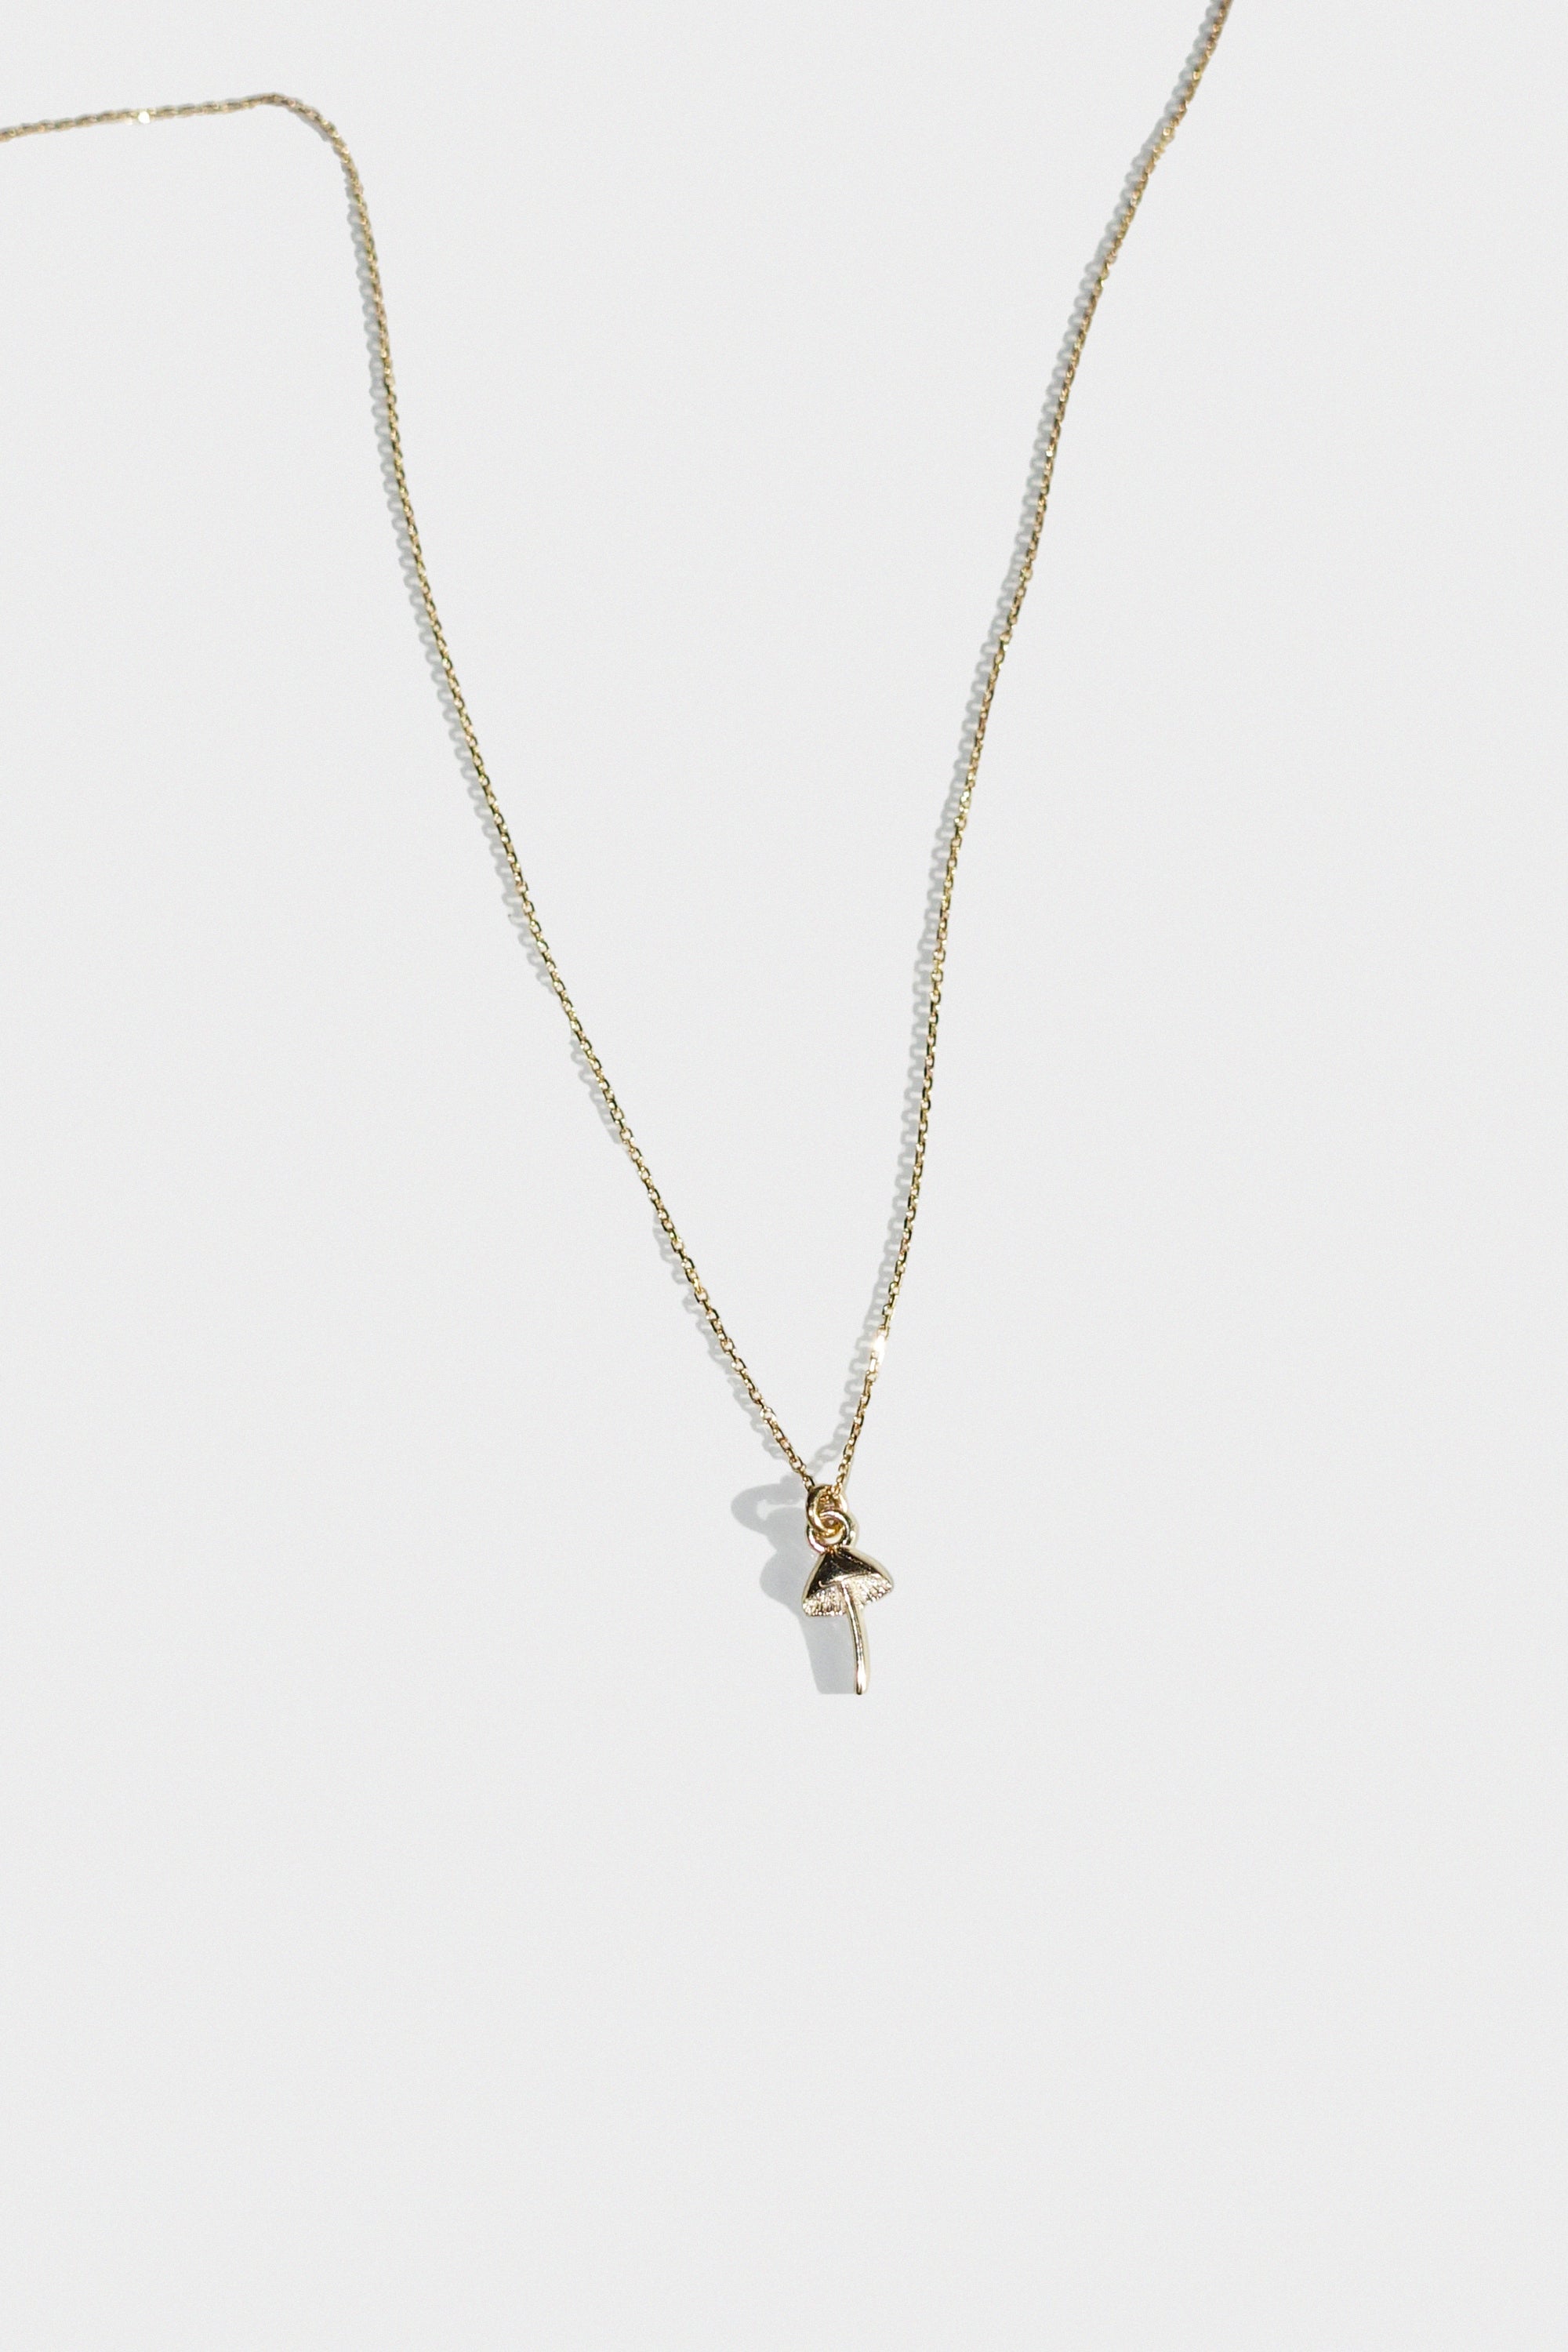 Itty Bitty Mushroom Pendant Necklace in 14k Gold